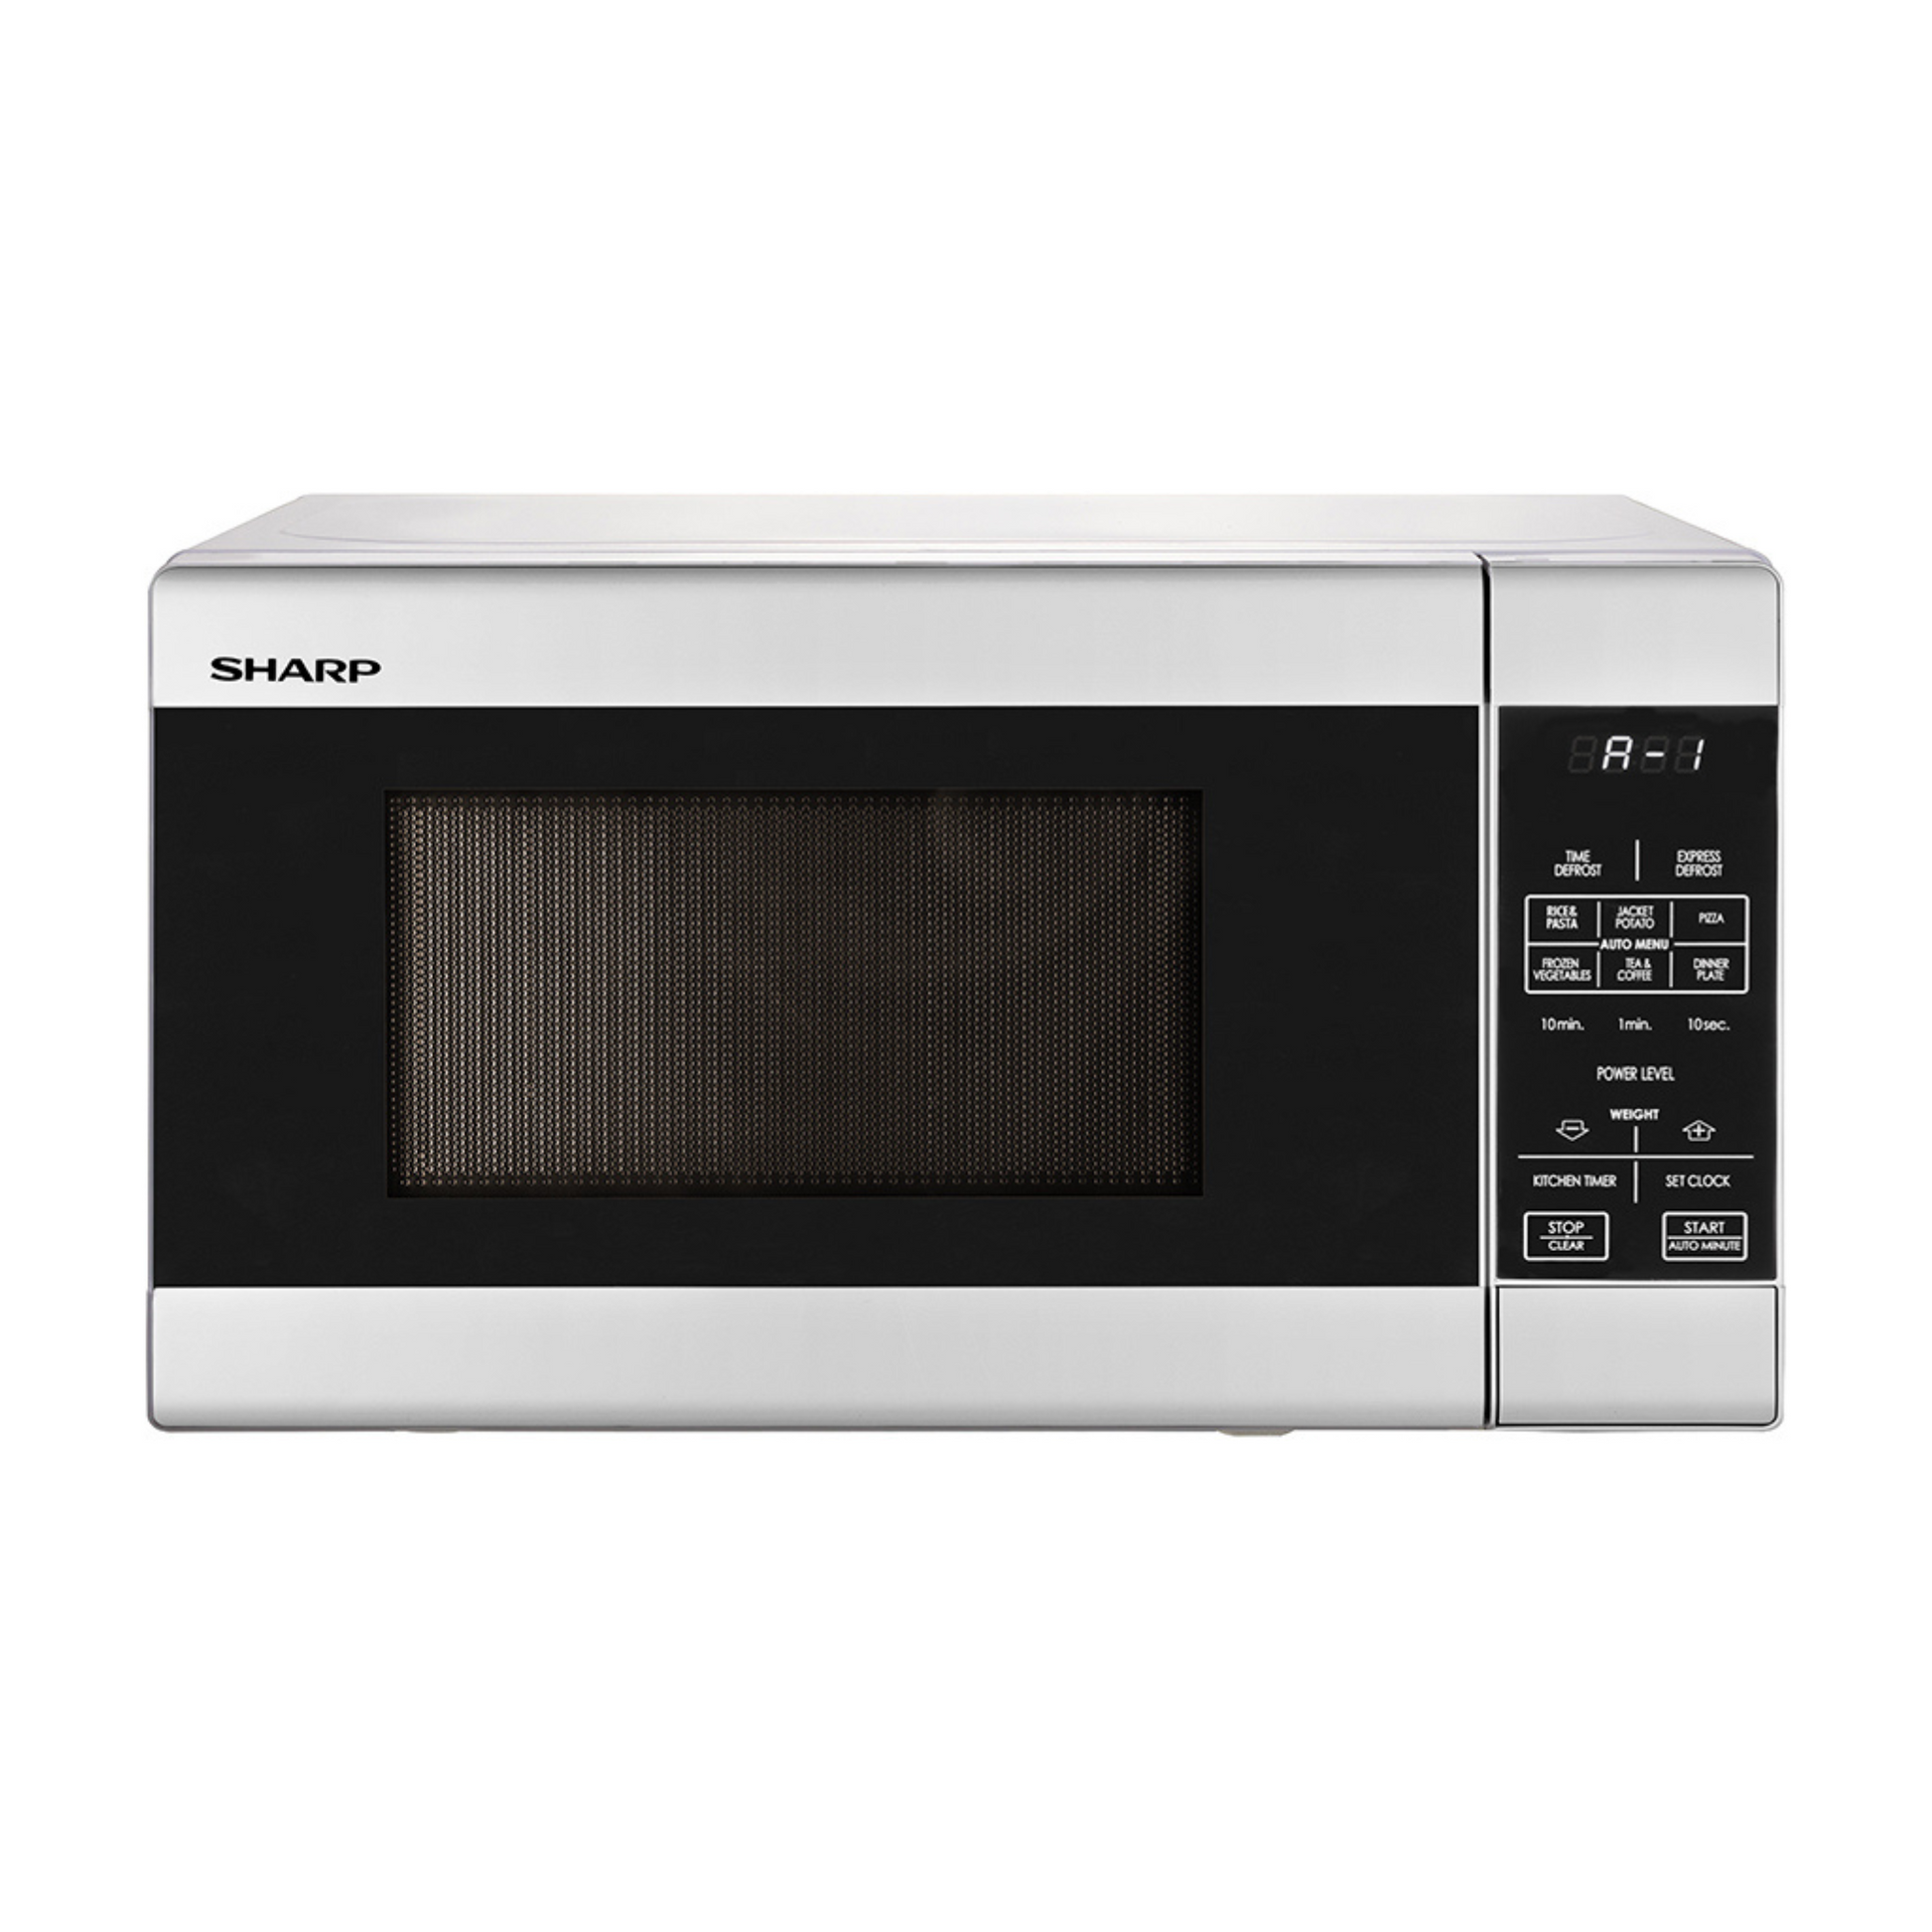 Sharp 20L Microwave Oven, R-211D (W)